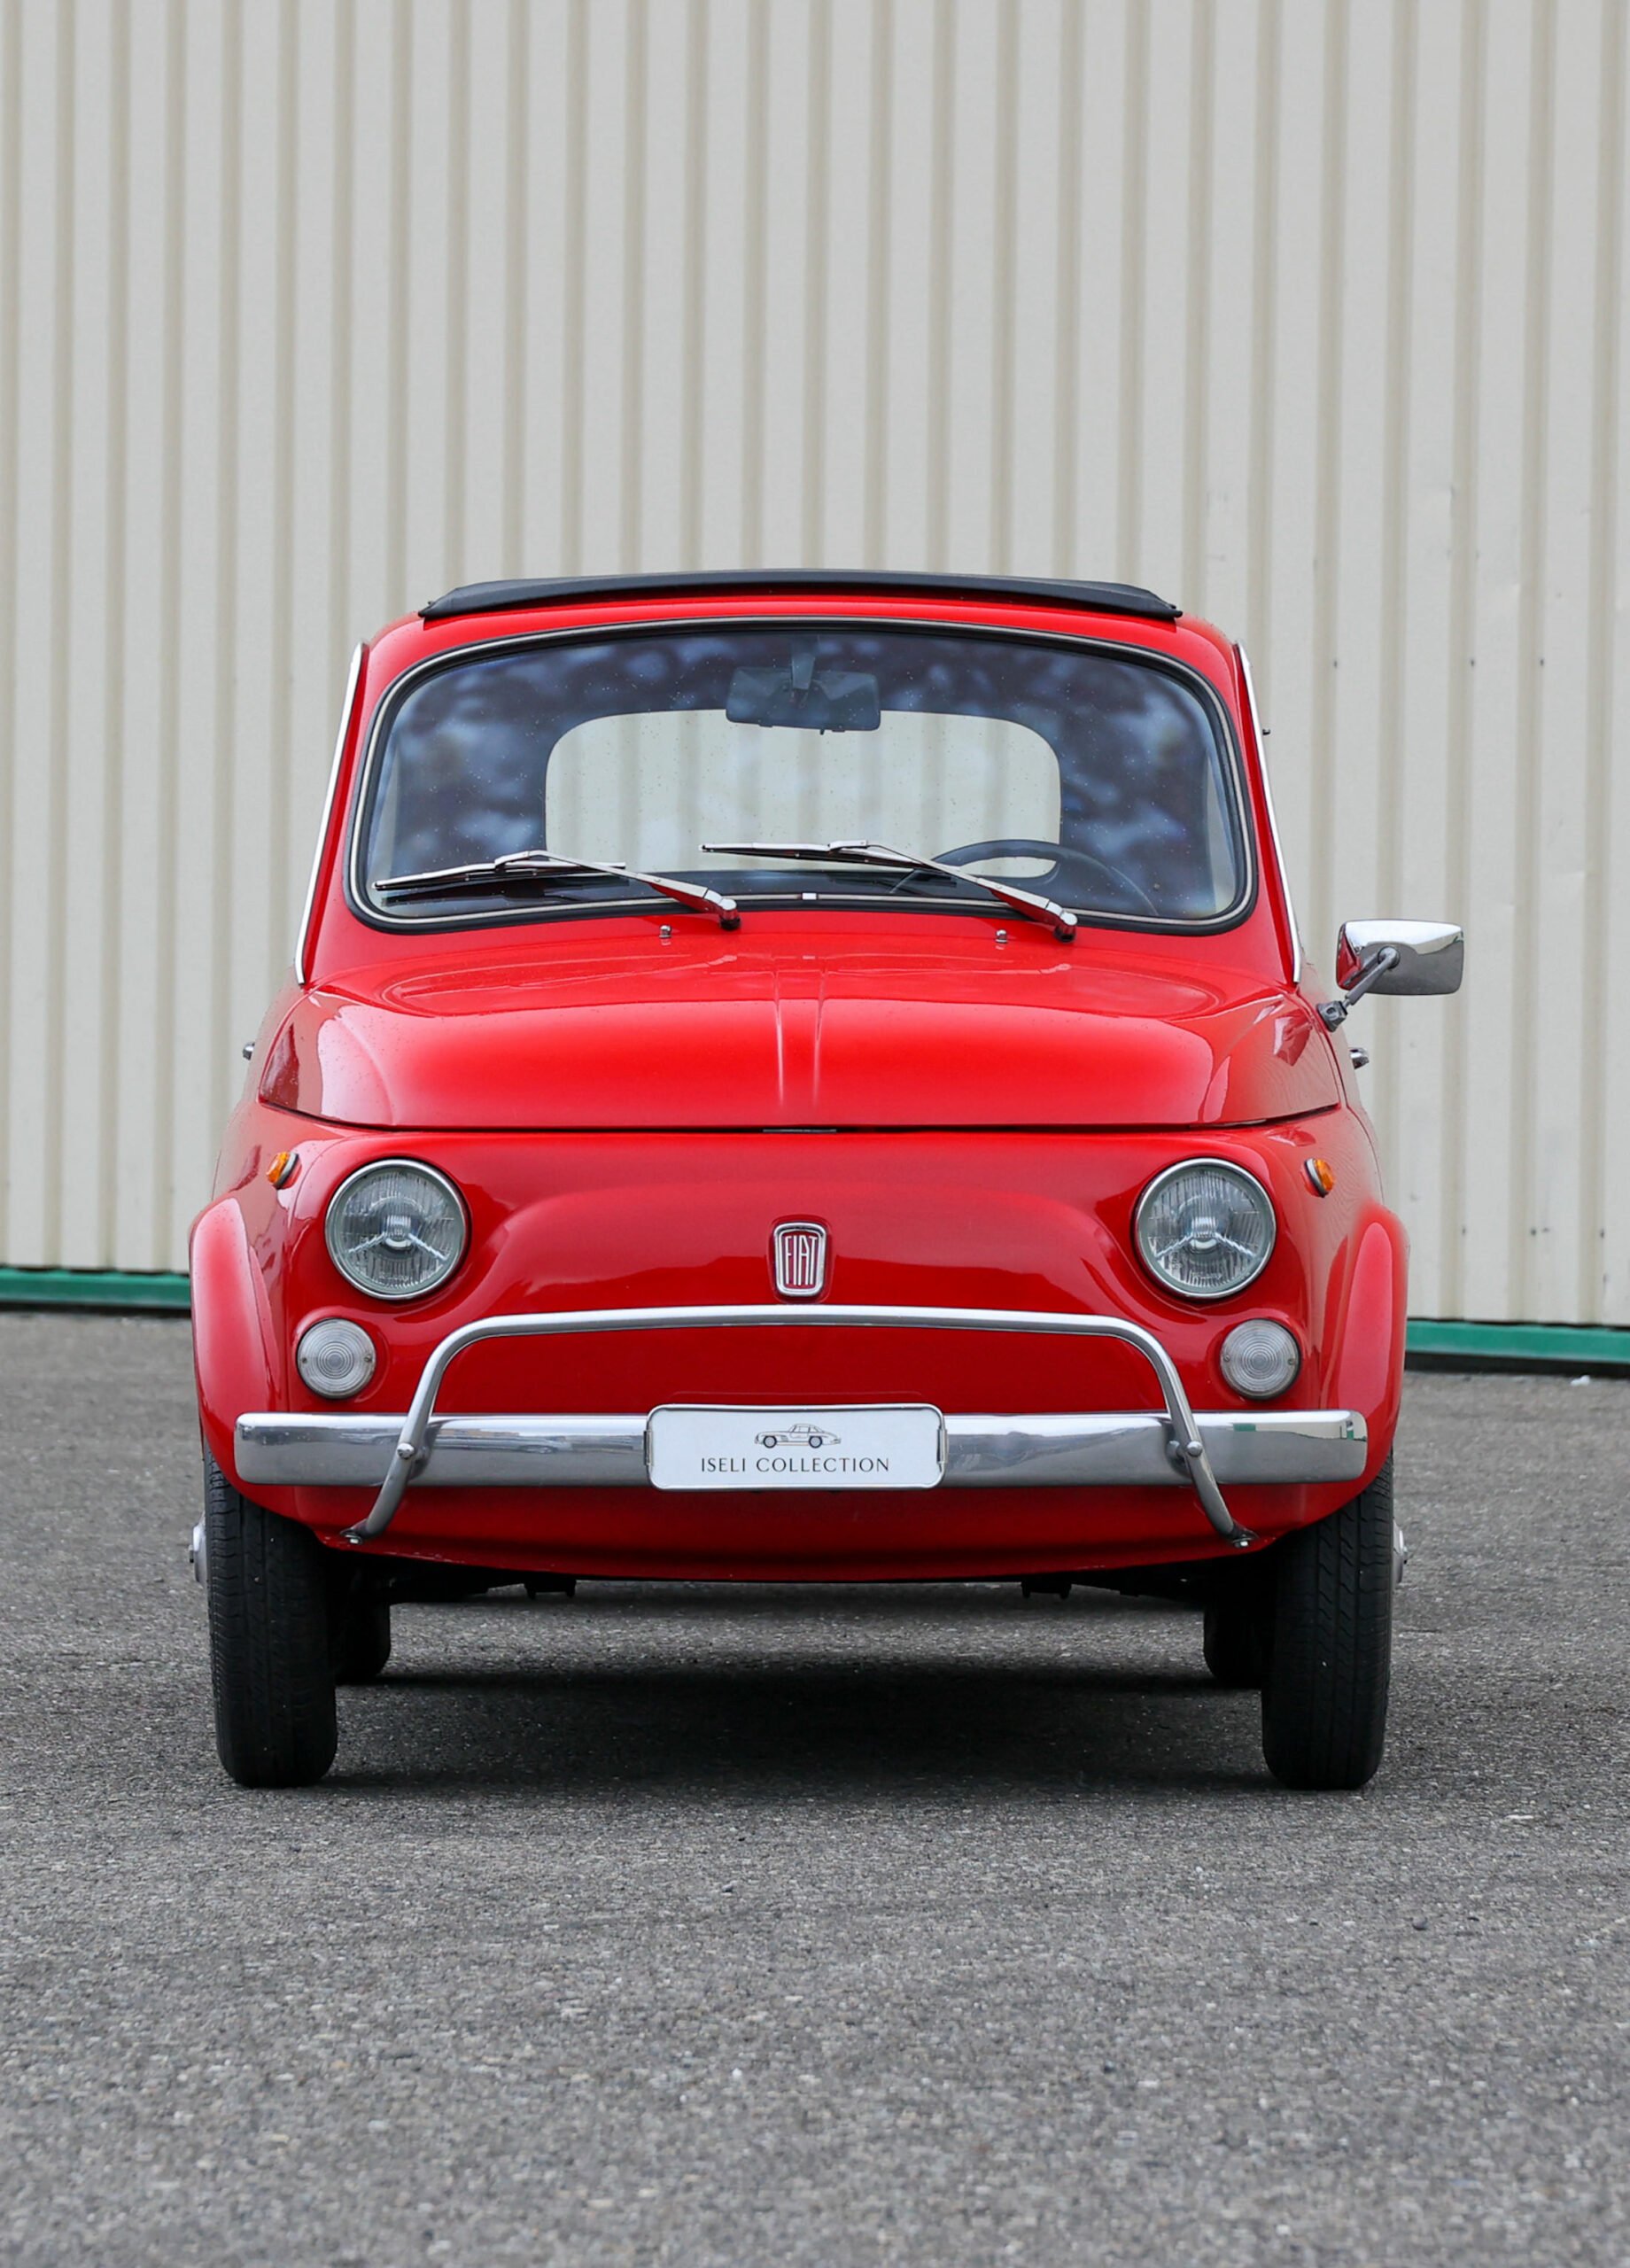 For Sale: An Adorable 1970 Fiat 500 L With A Matching Trailer